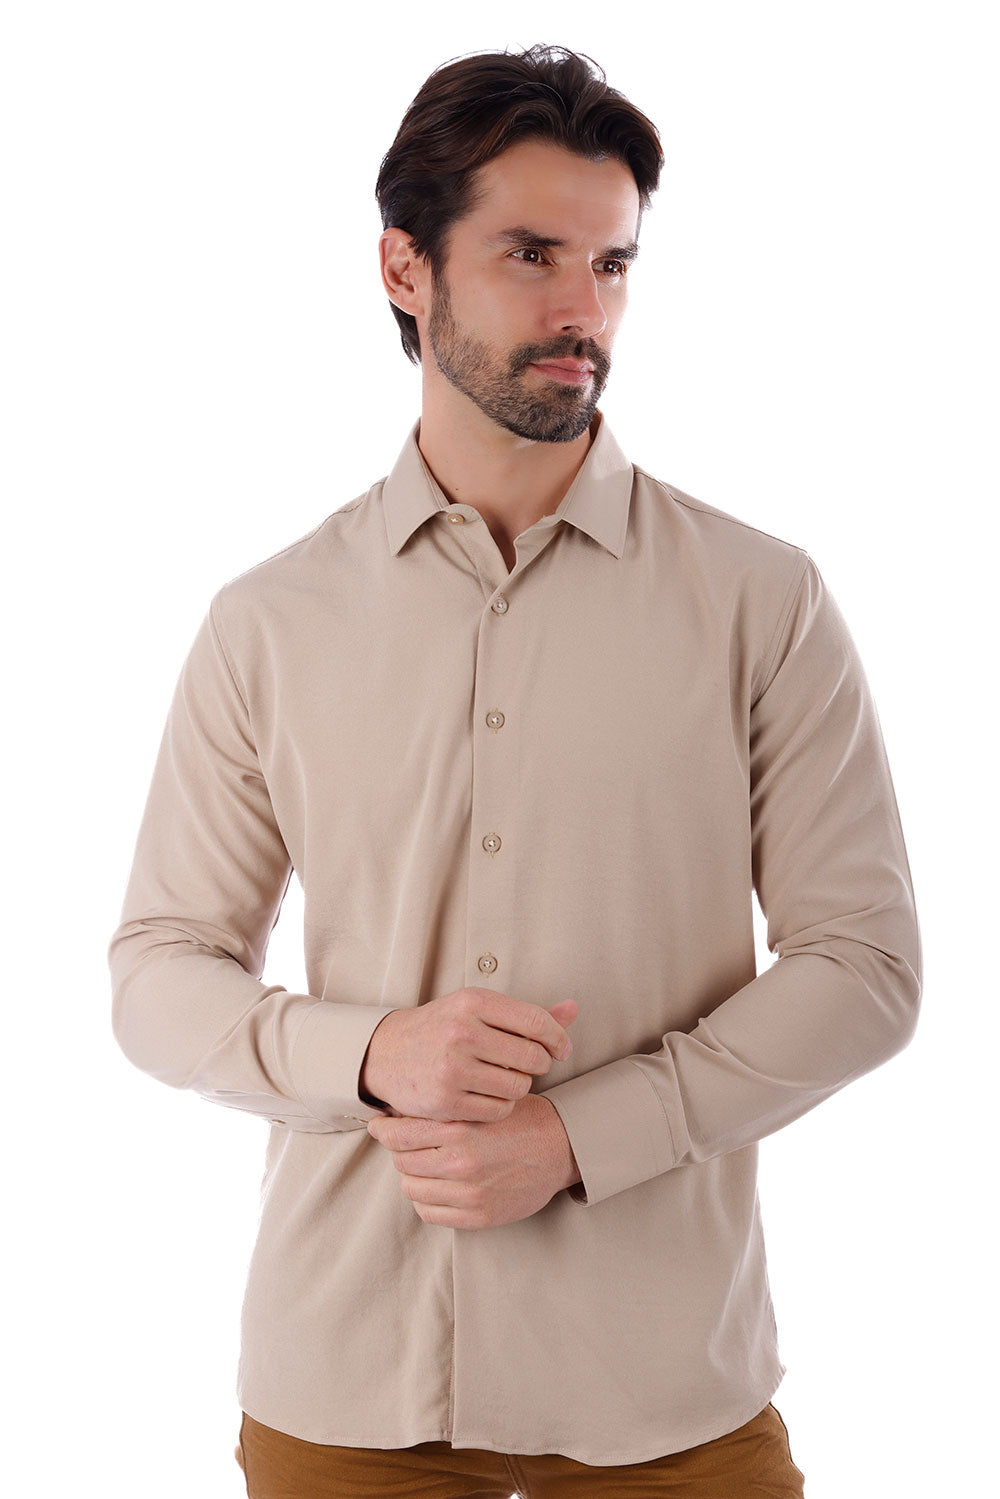 BARABAS Men's Solid Color Casual Button Down Long Sleeve Shirt 4B33 Beige